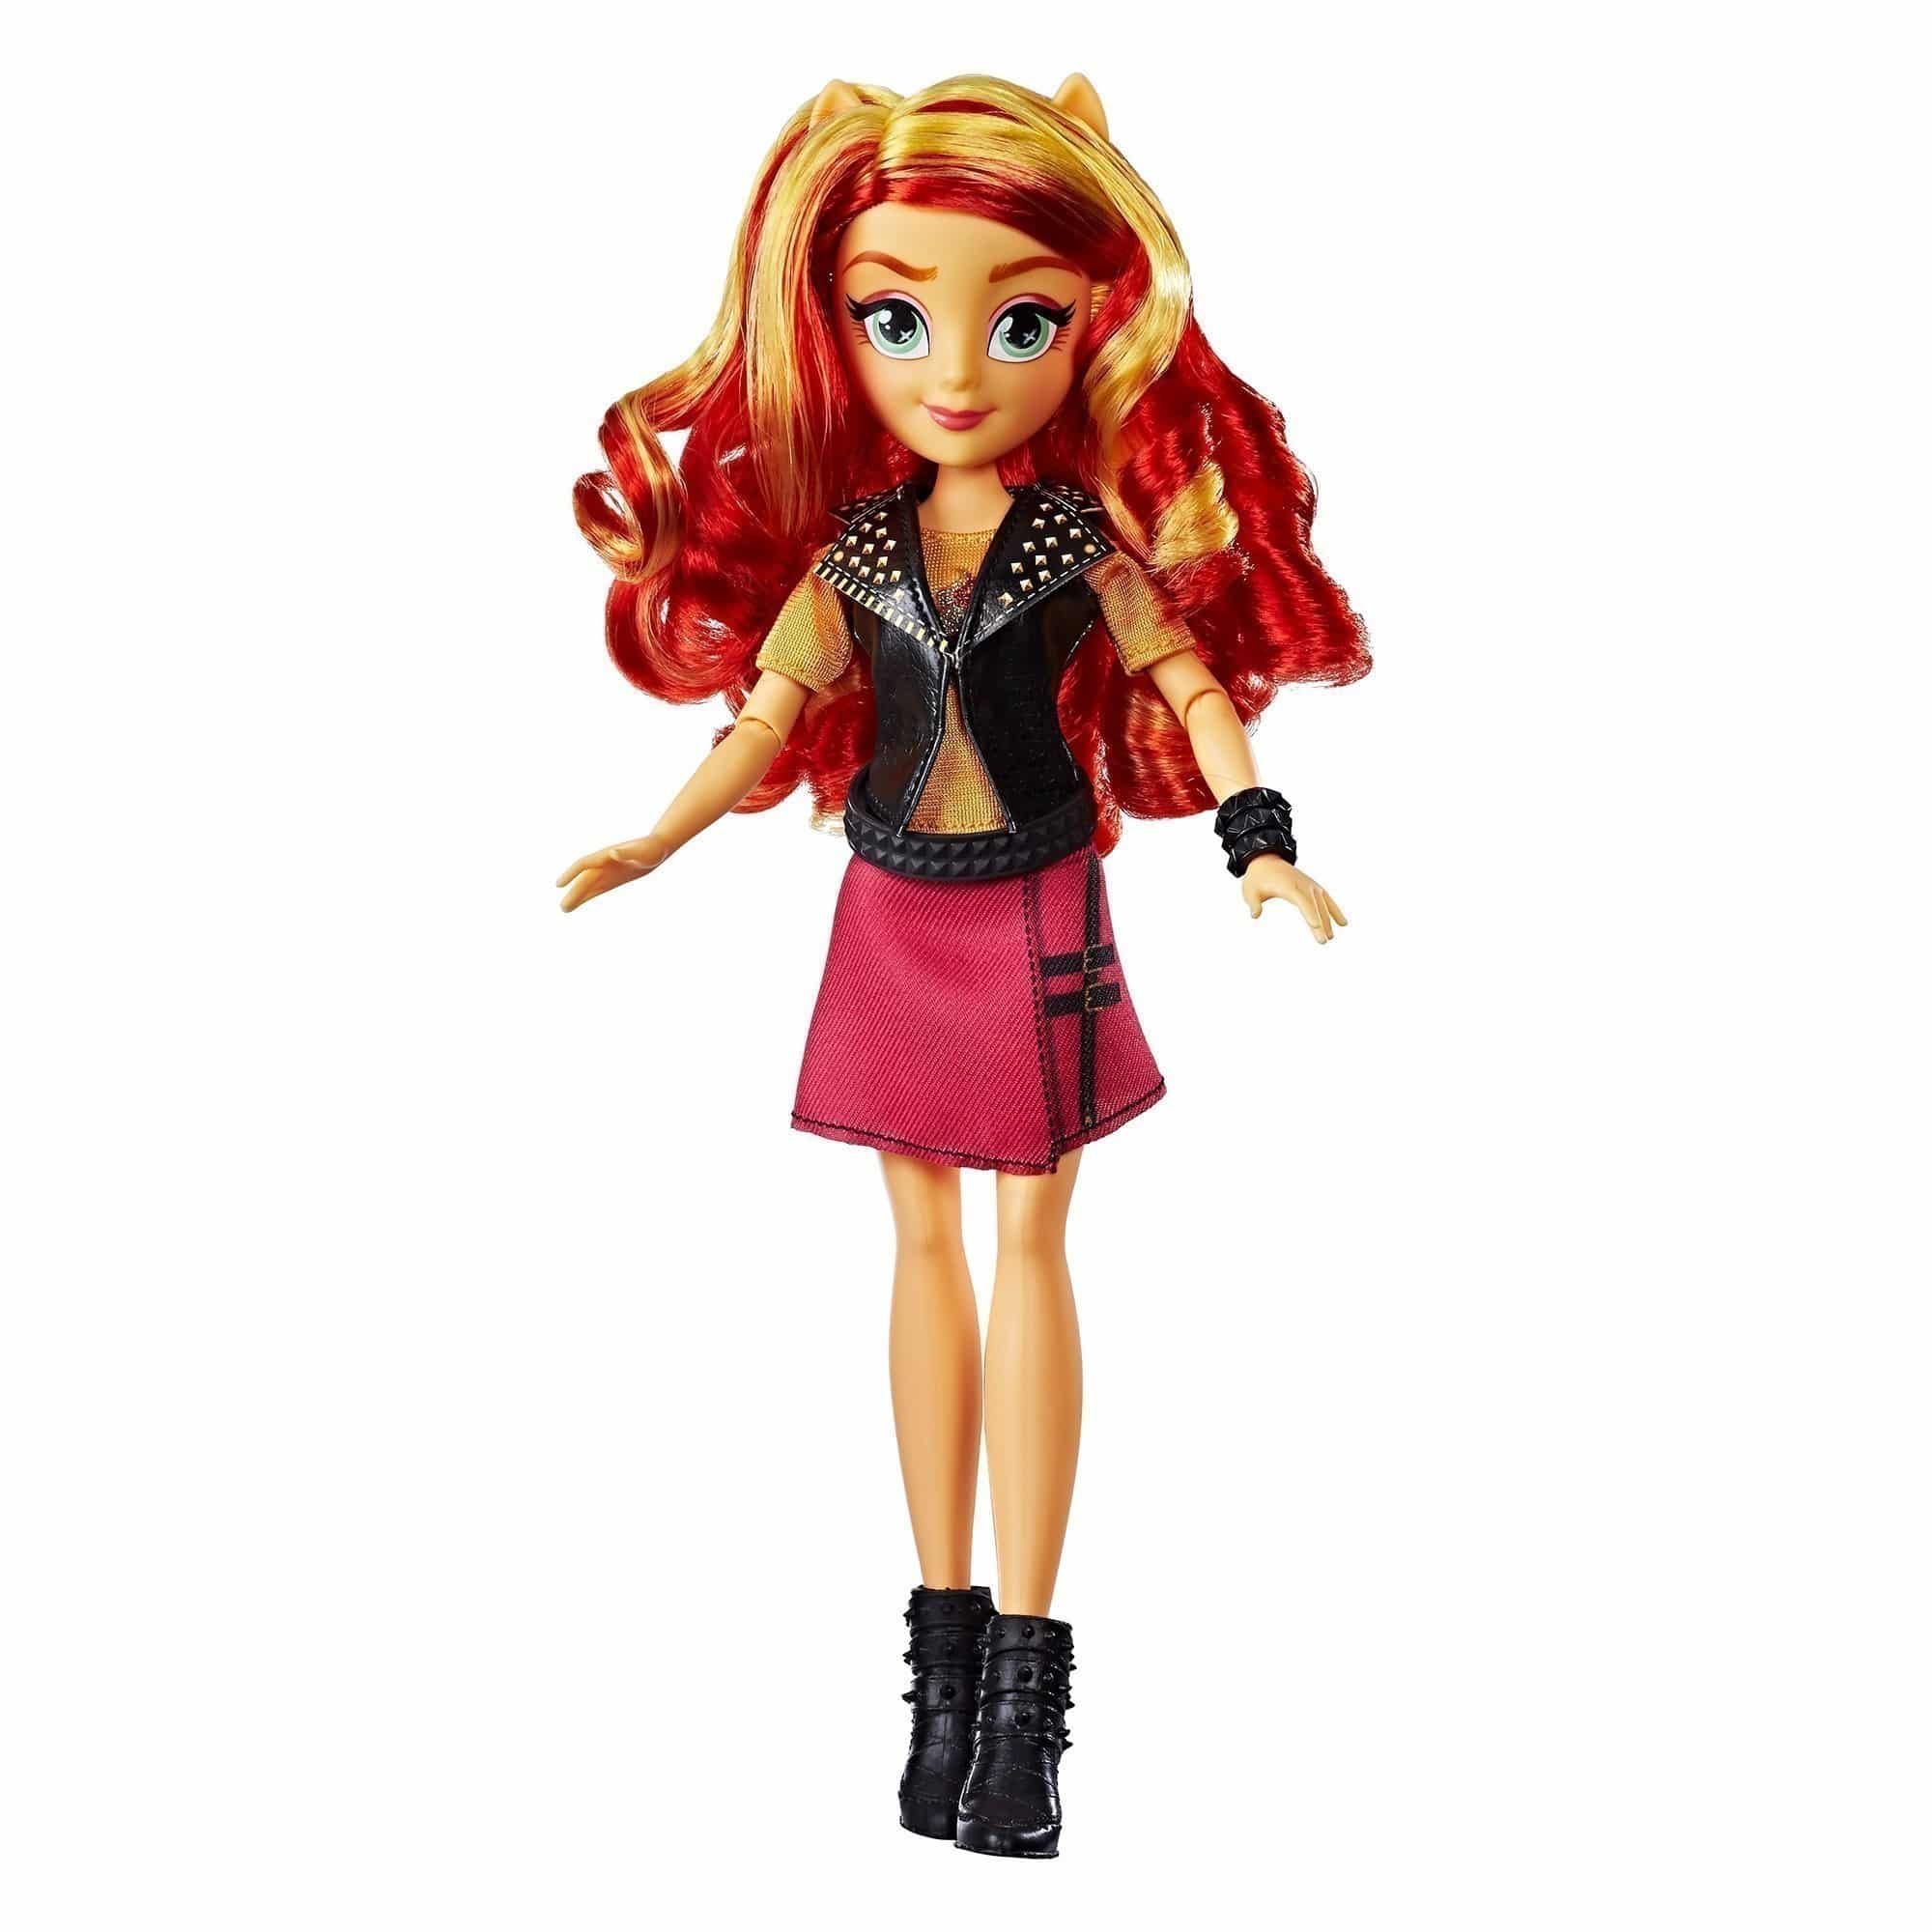 My Little Pony - Equestria Girls Classic Fashion Doll - Sunset Shimmer